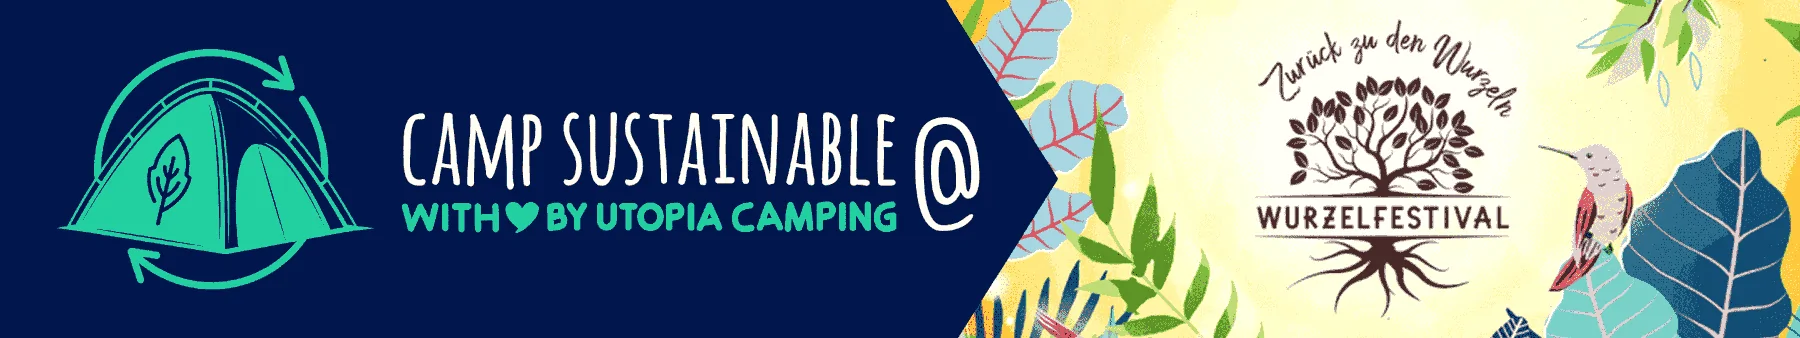 Sustainable solutions for festival-goers - Utopia Camping - With our sustainable solutions at festivals, we tackle piles of garbage full of camping gear by reusing camping stuff left behind. rent a tent, festival, camping equipment for rent 